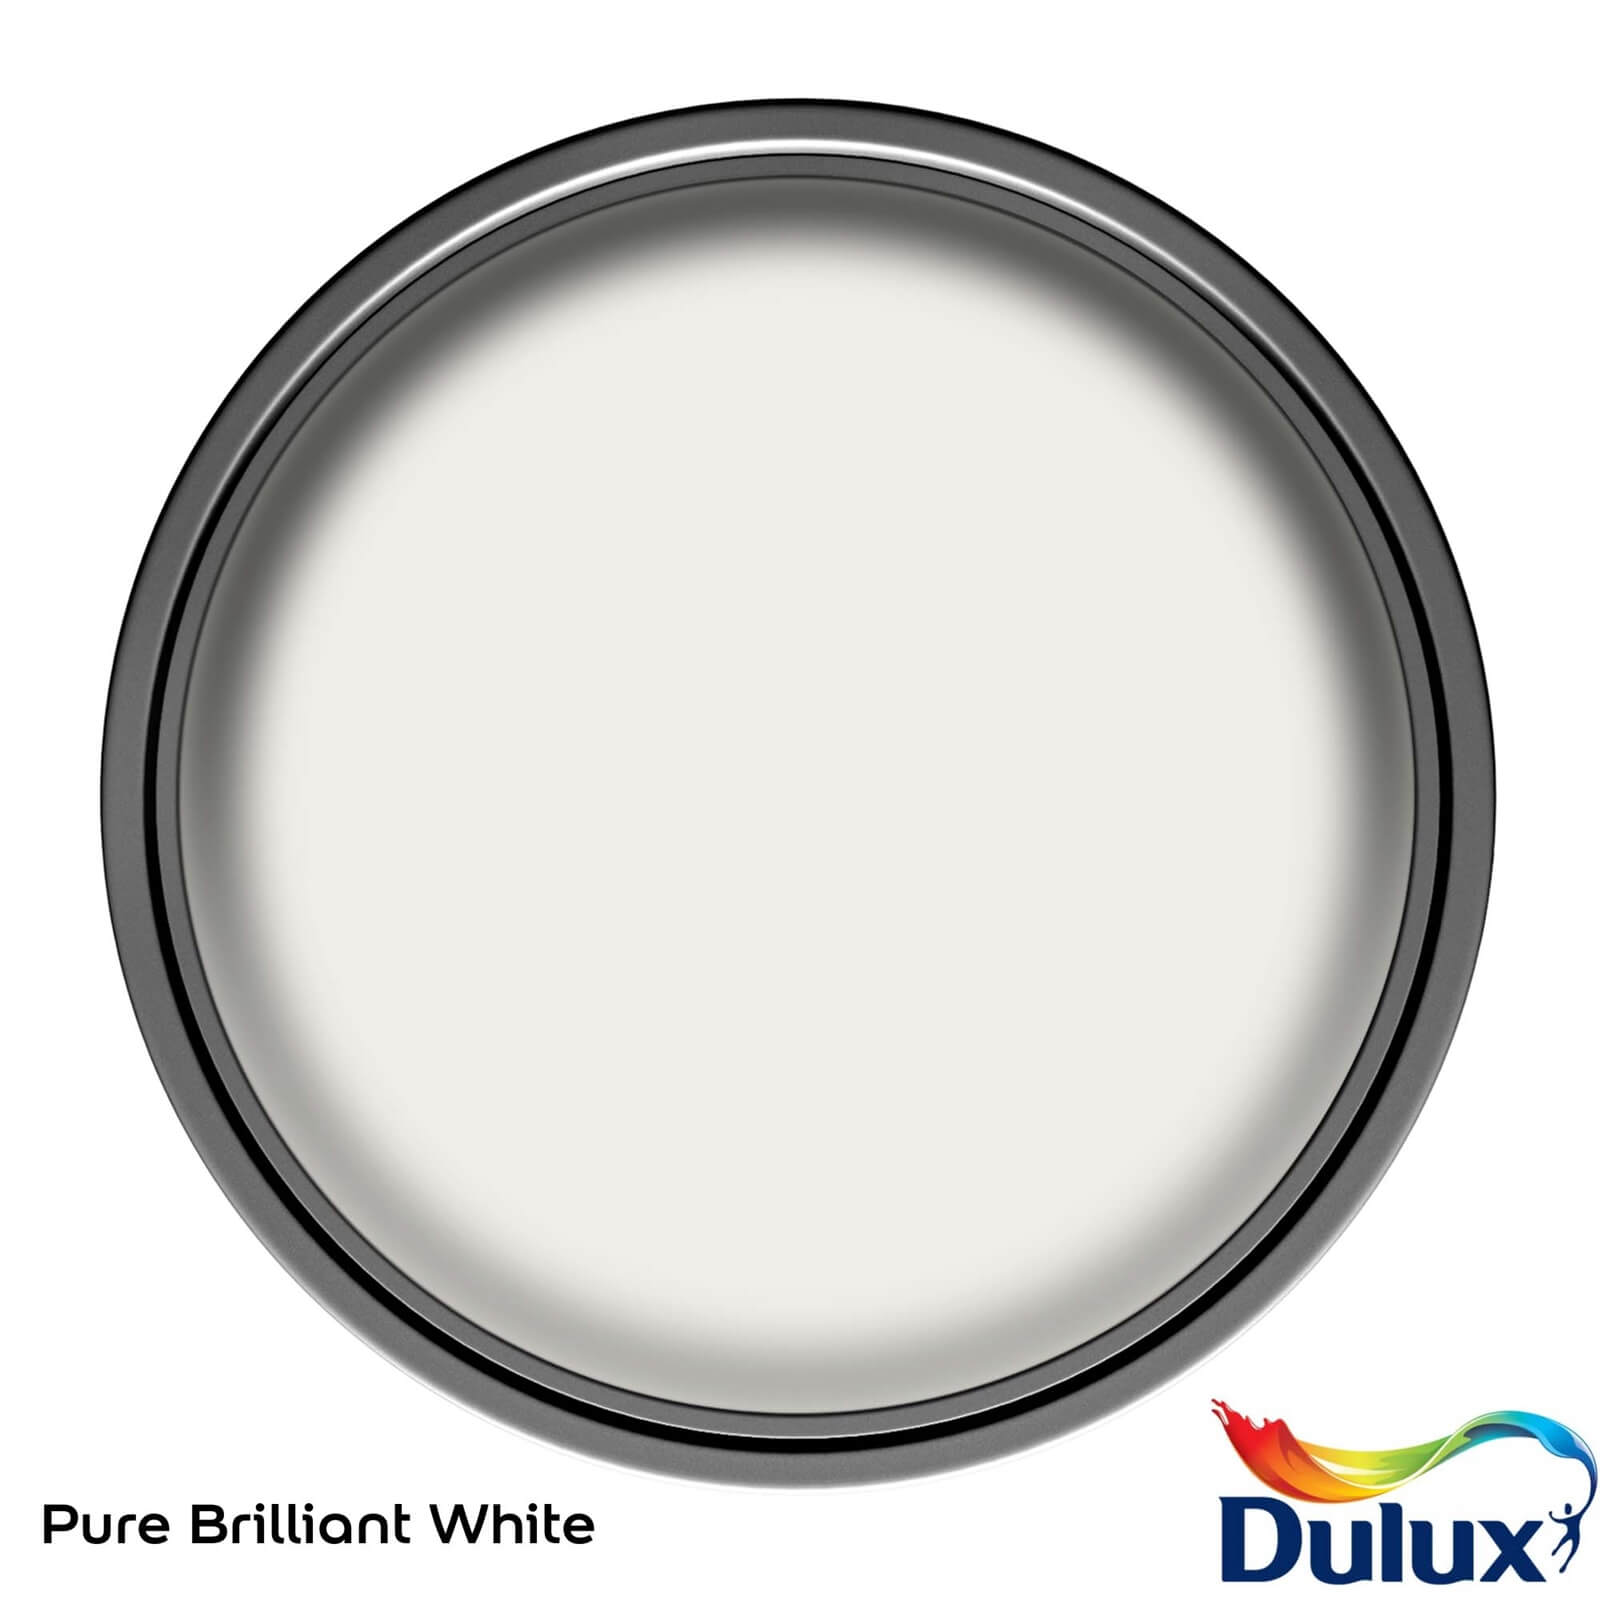 Dulux Quick Dry Difficult Surface Primer - 750ml